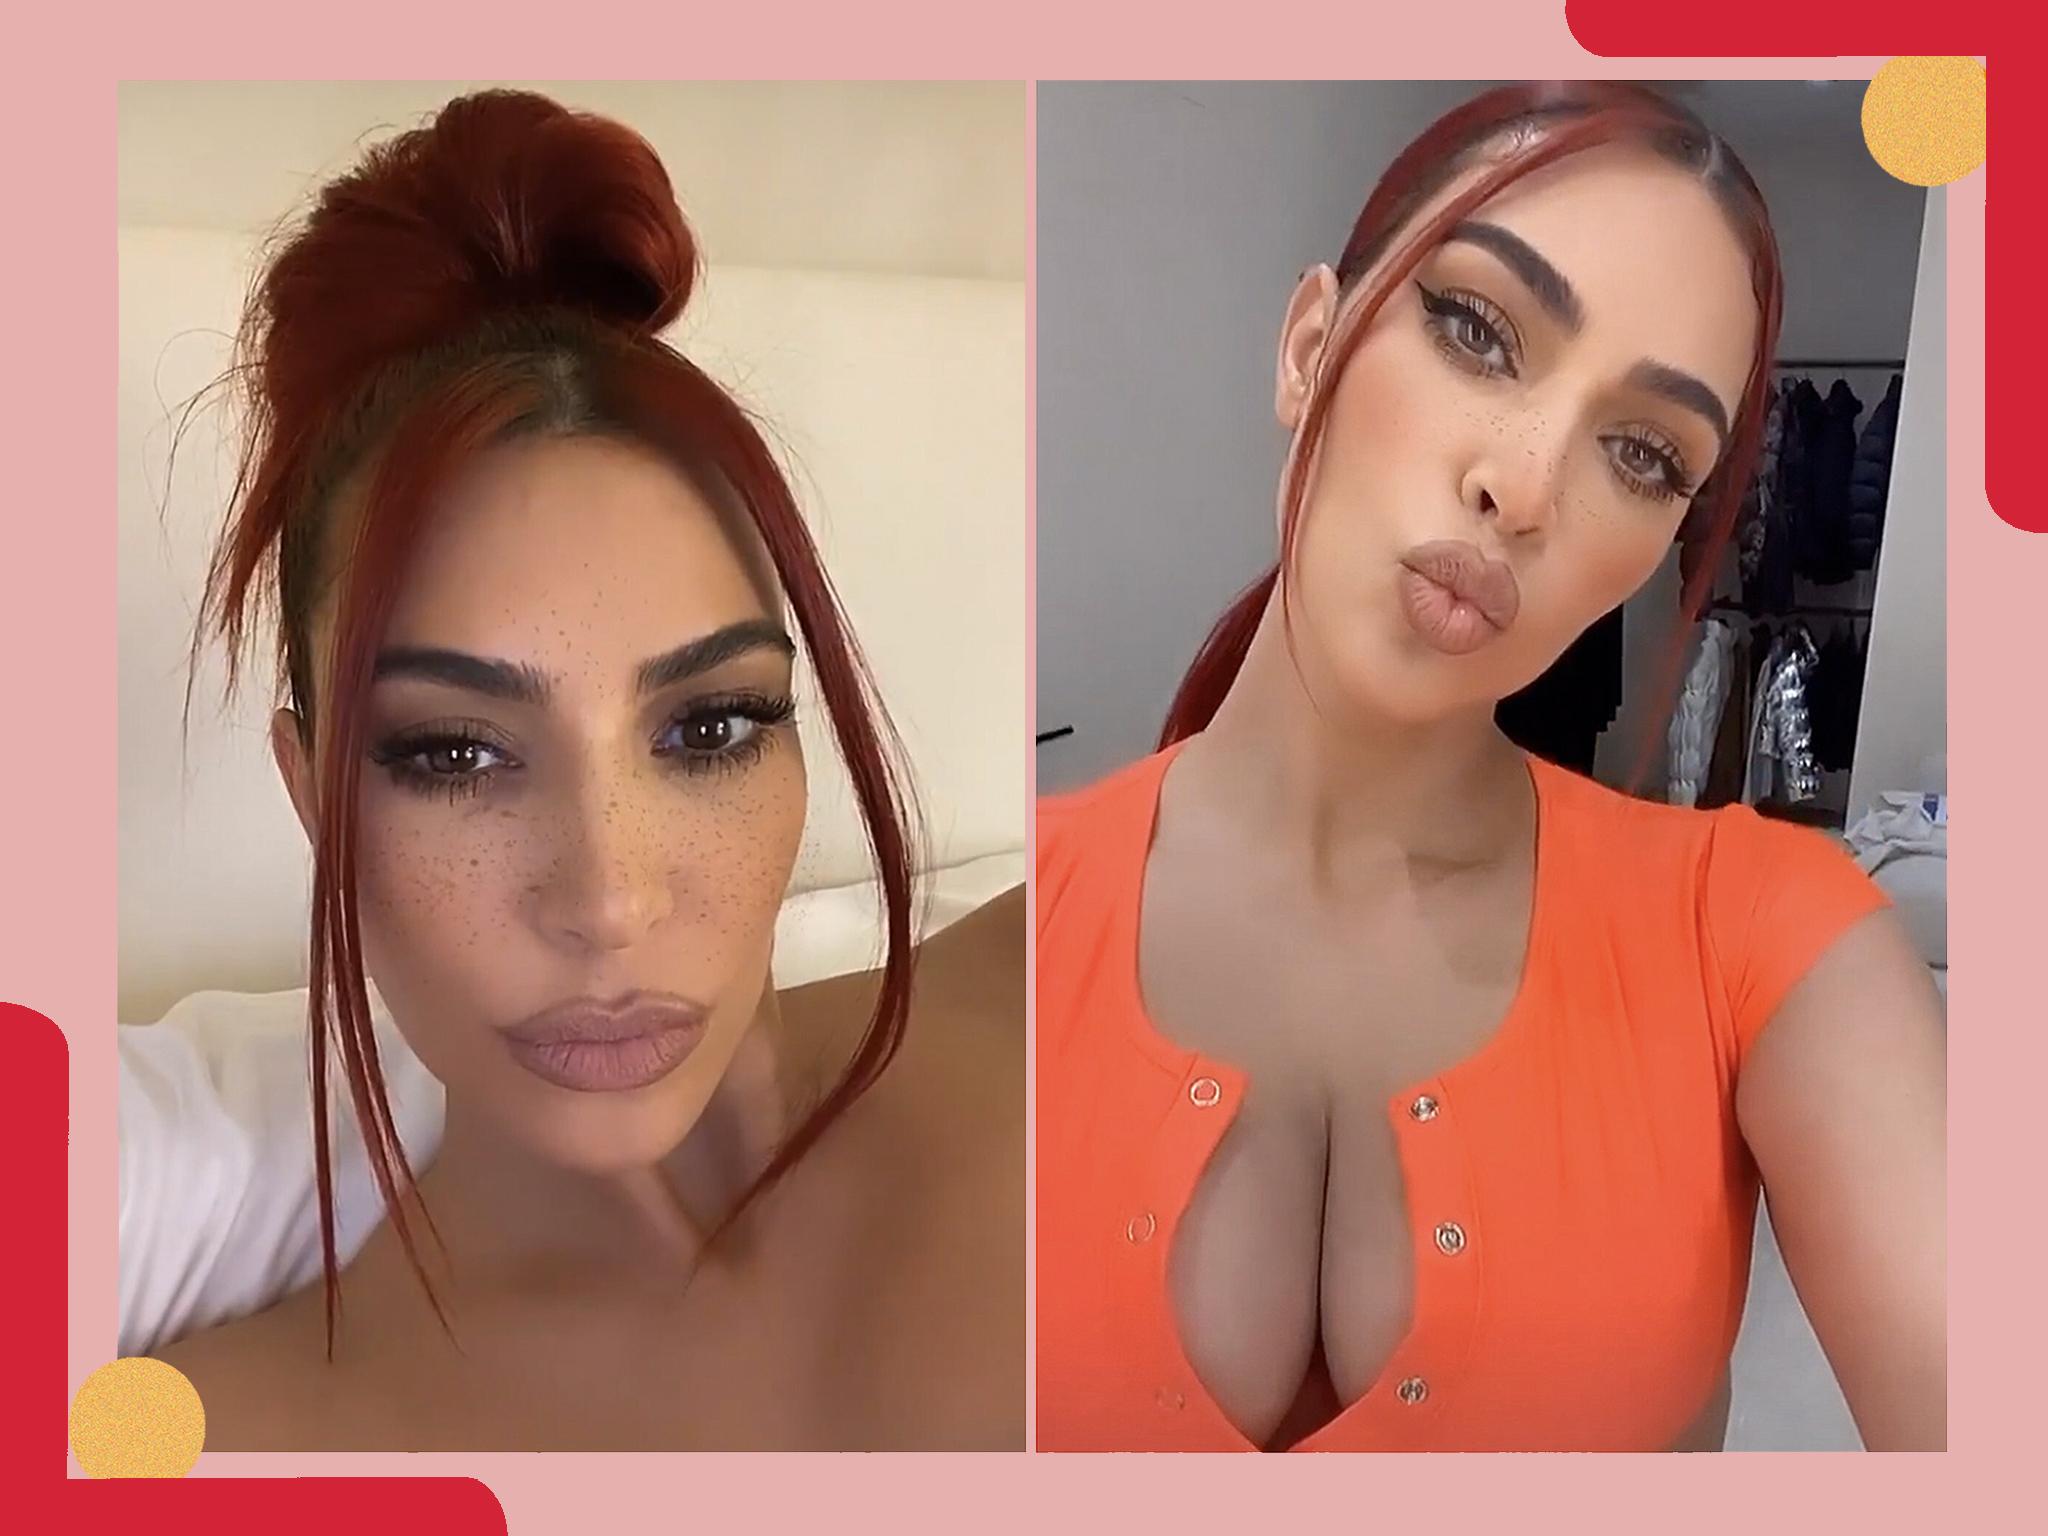 Red is set to be the colour of the summer thanks to Kim Kardashian West's new Nineties-inspired do